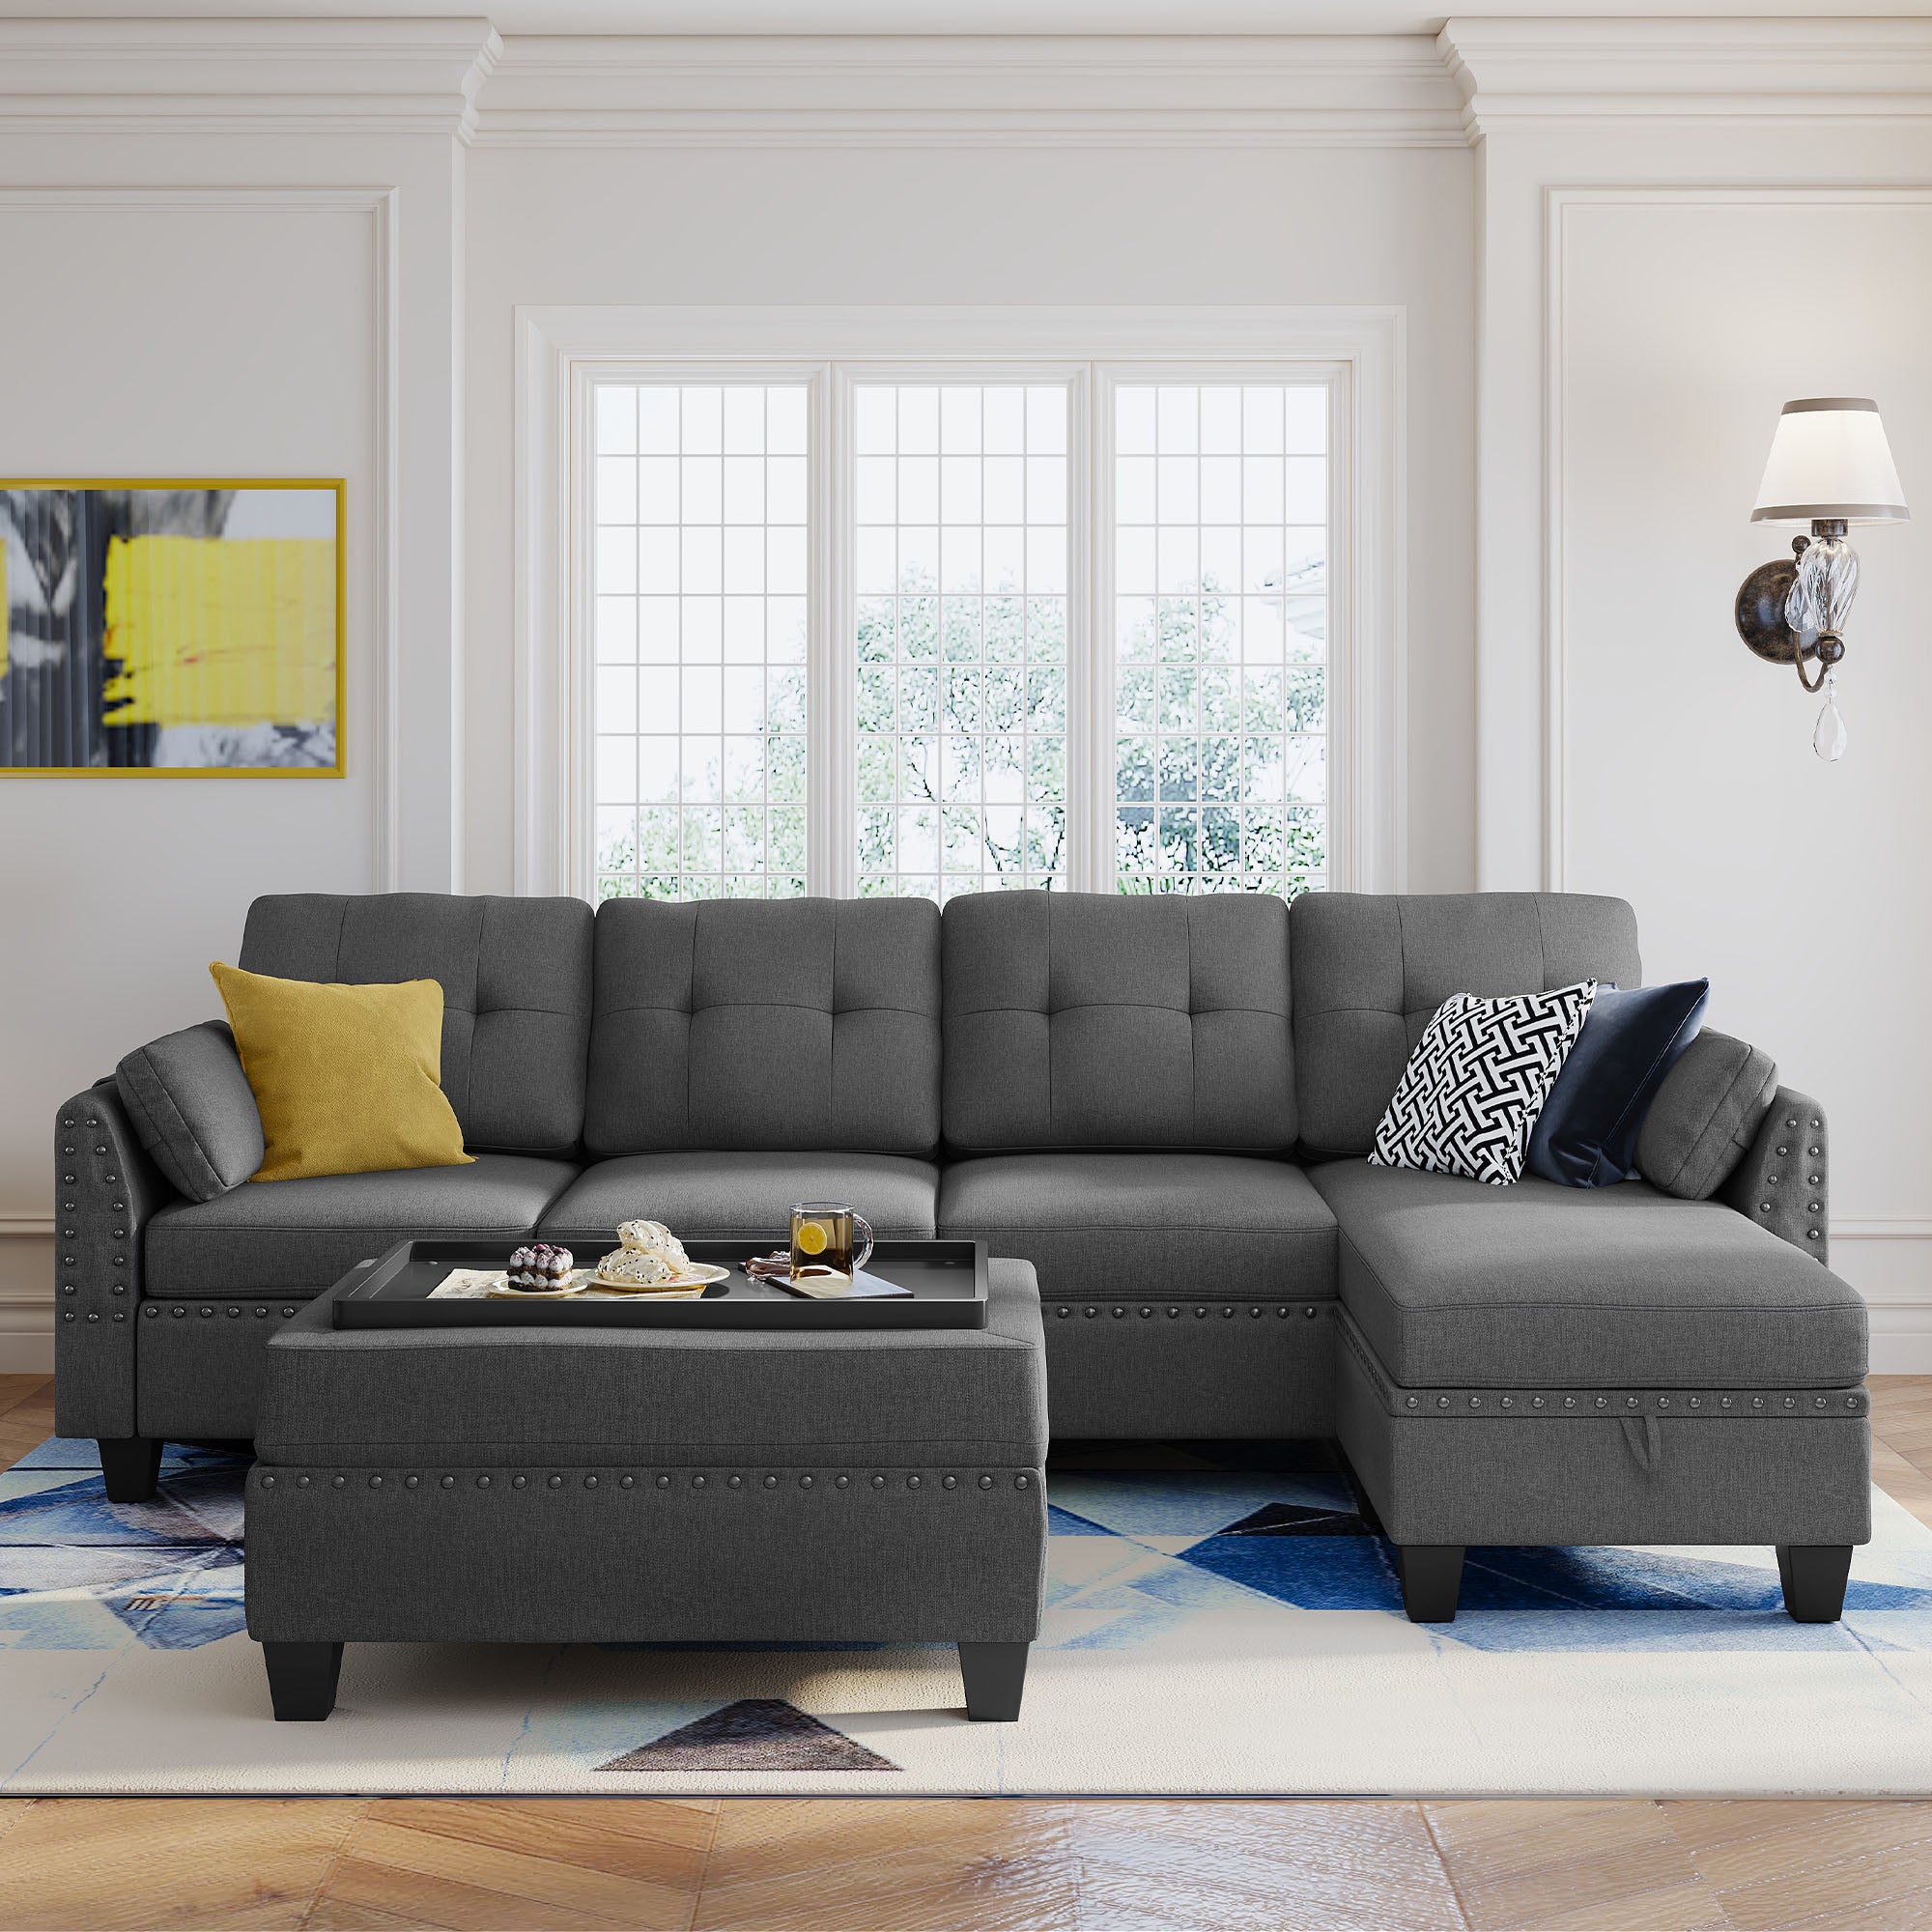 HONBAY 5-Piece Polyester Convertible Sectional With Storage Ottoman